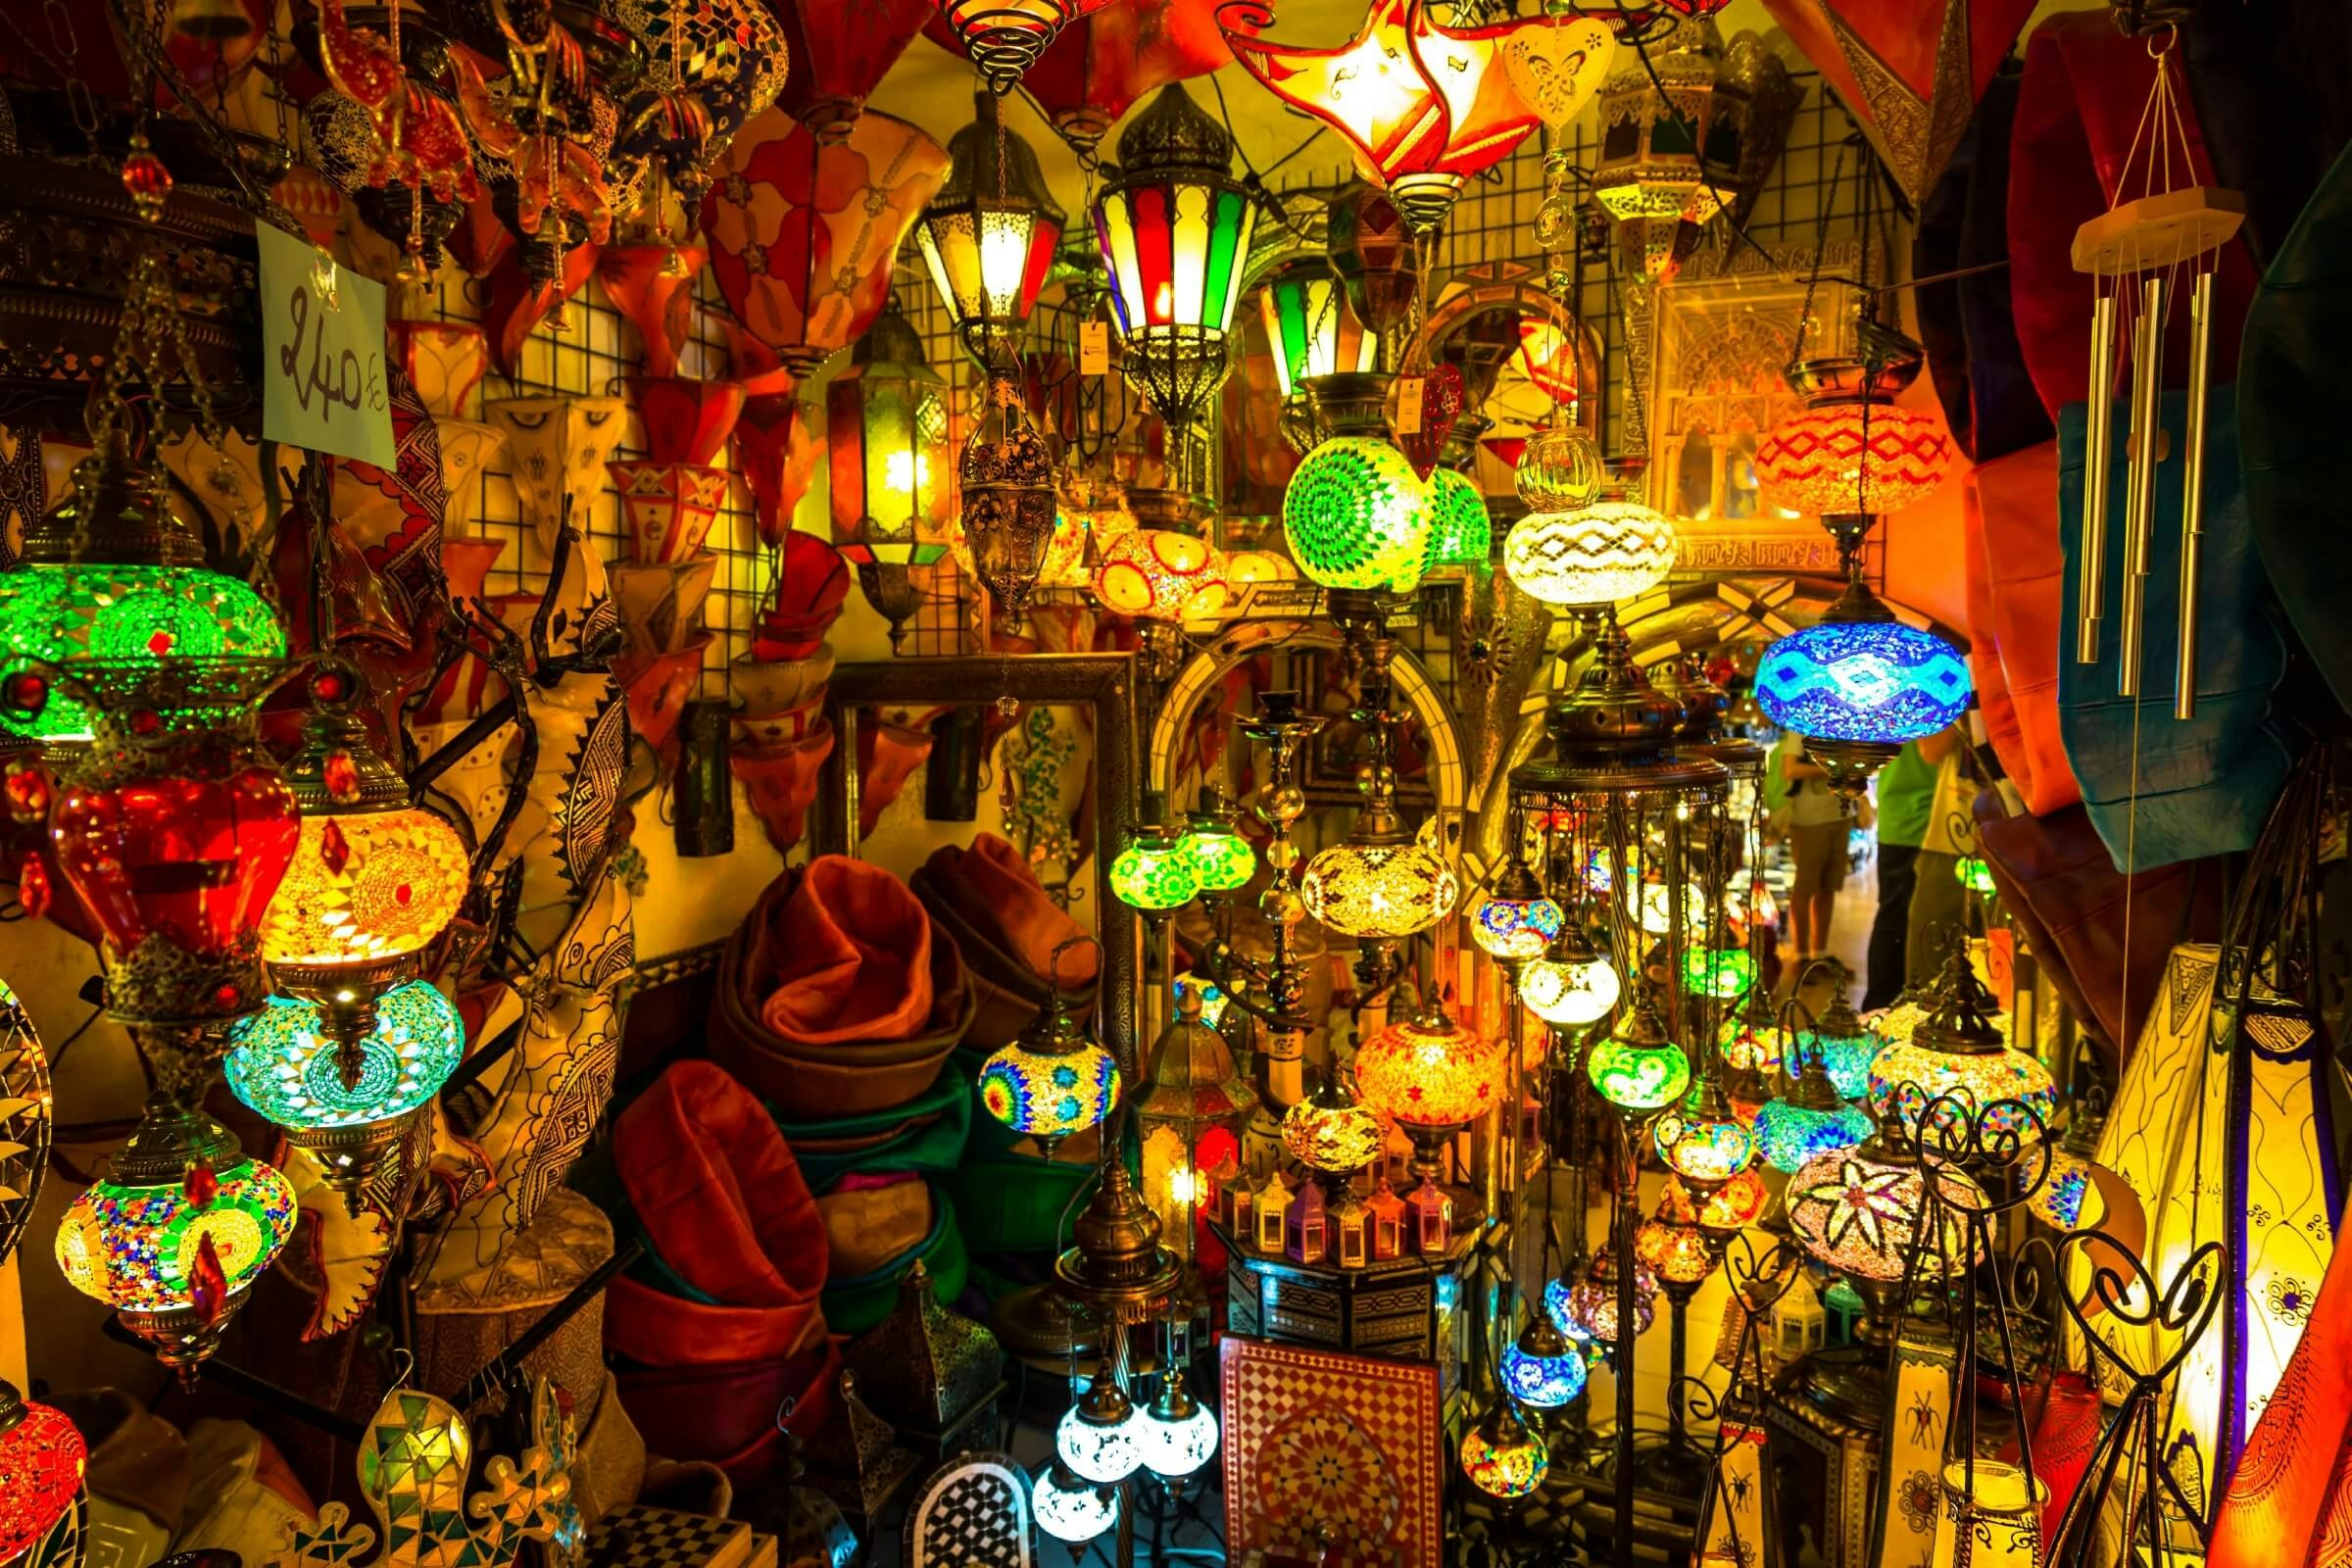 Dozens of colourful lamps glowing in a stall